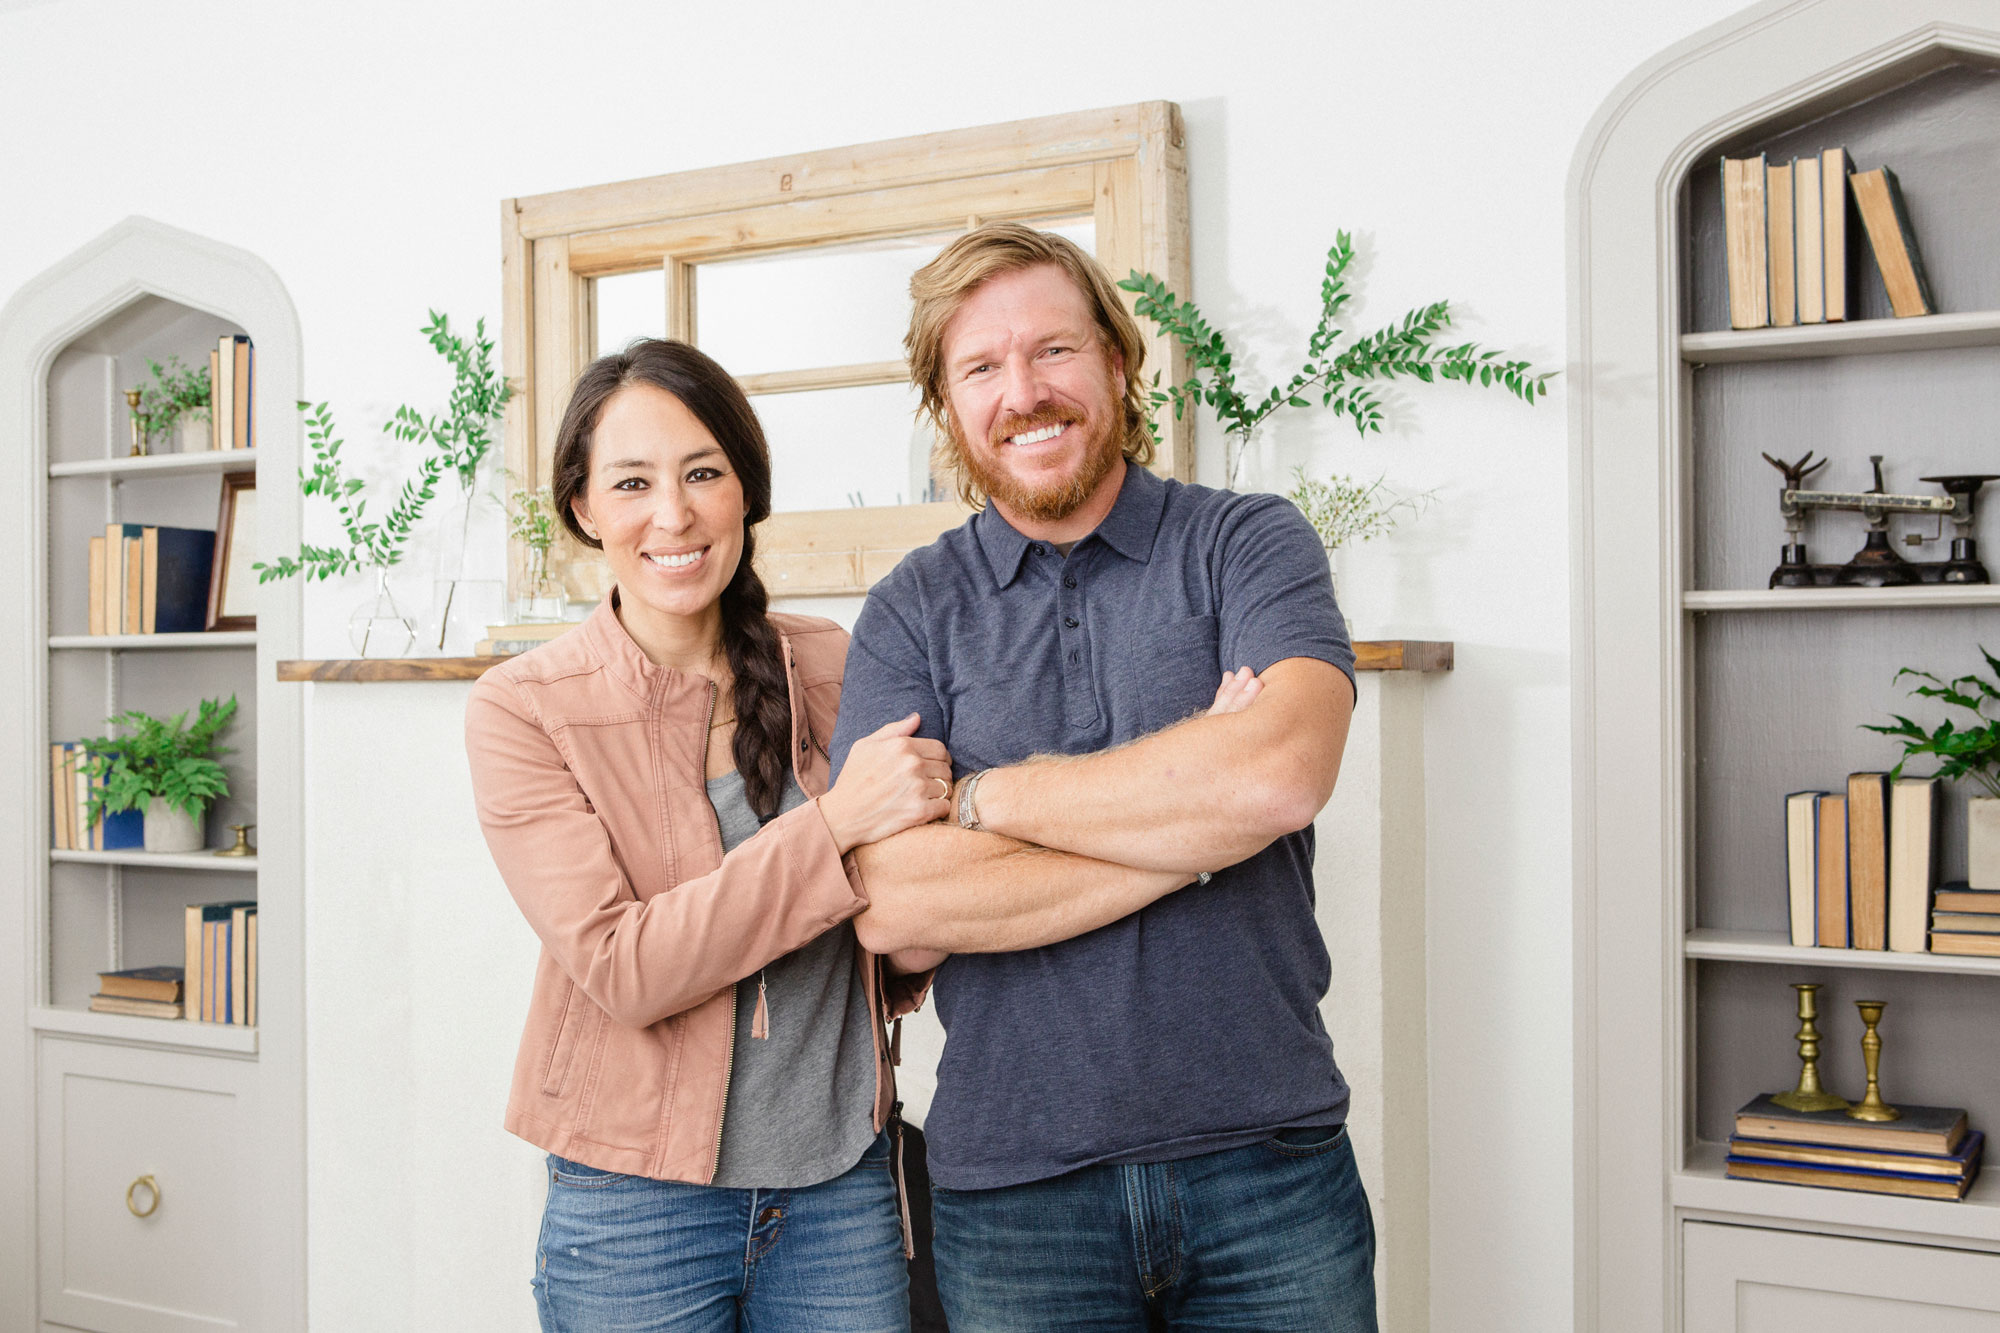 Chip and Joanna Gaines posing for a photo in front of a fireplace.